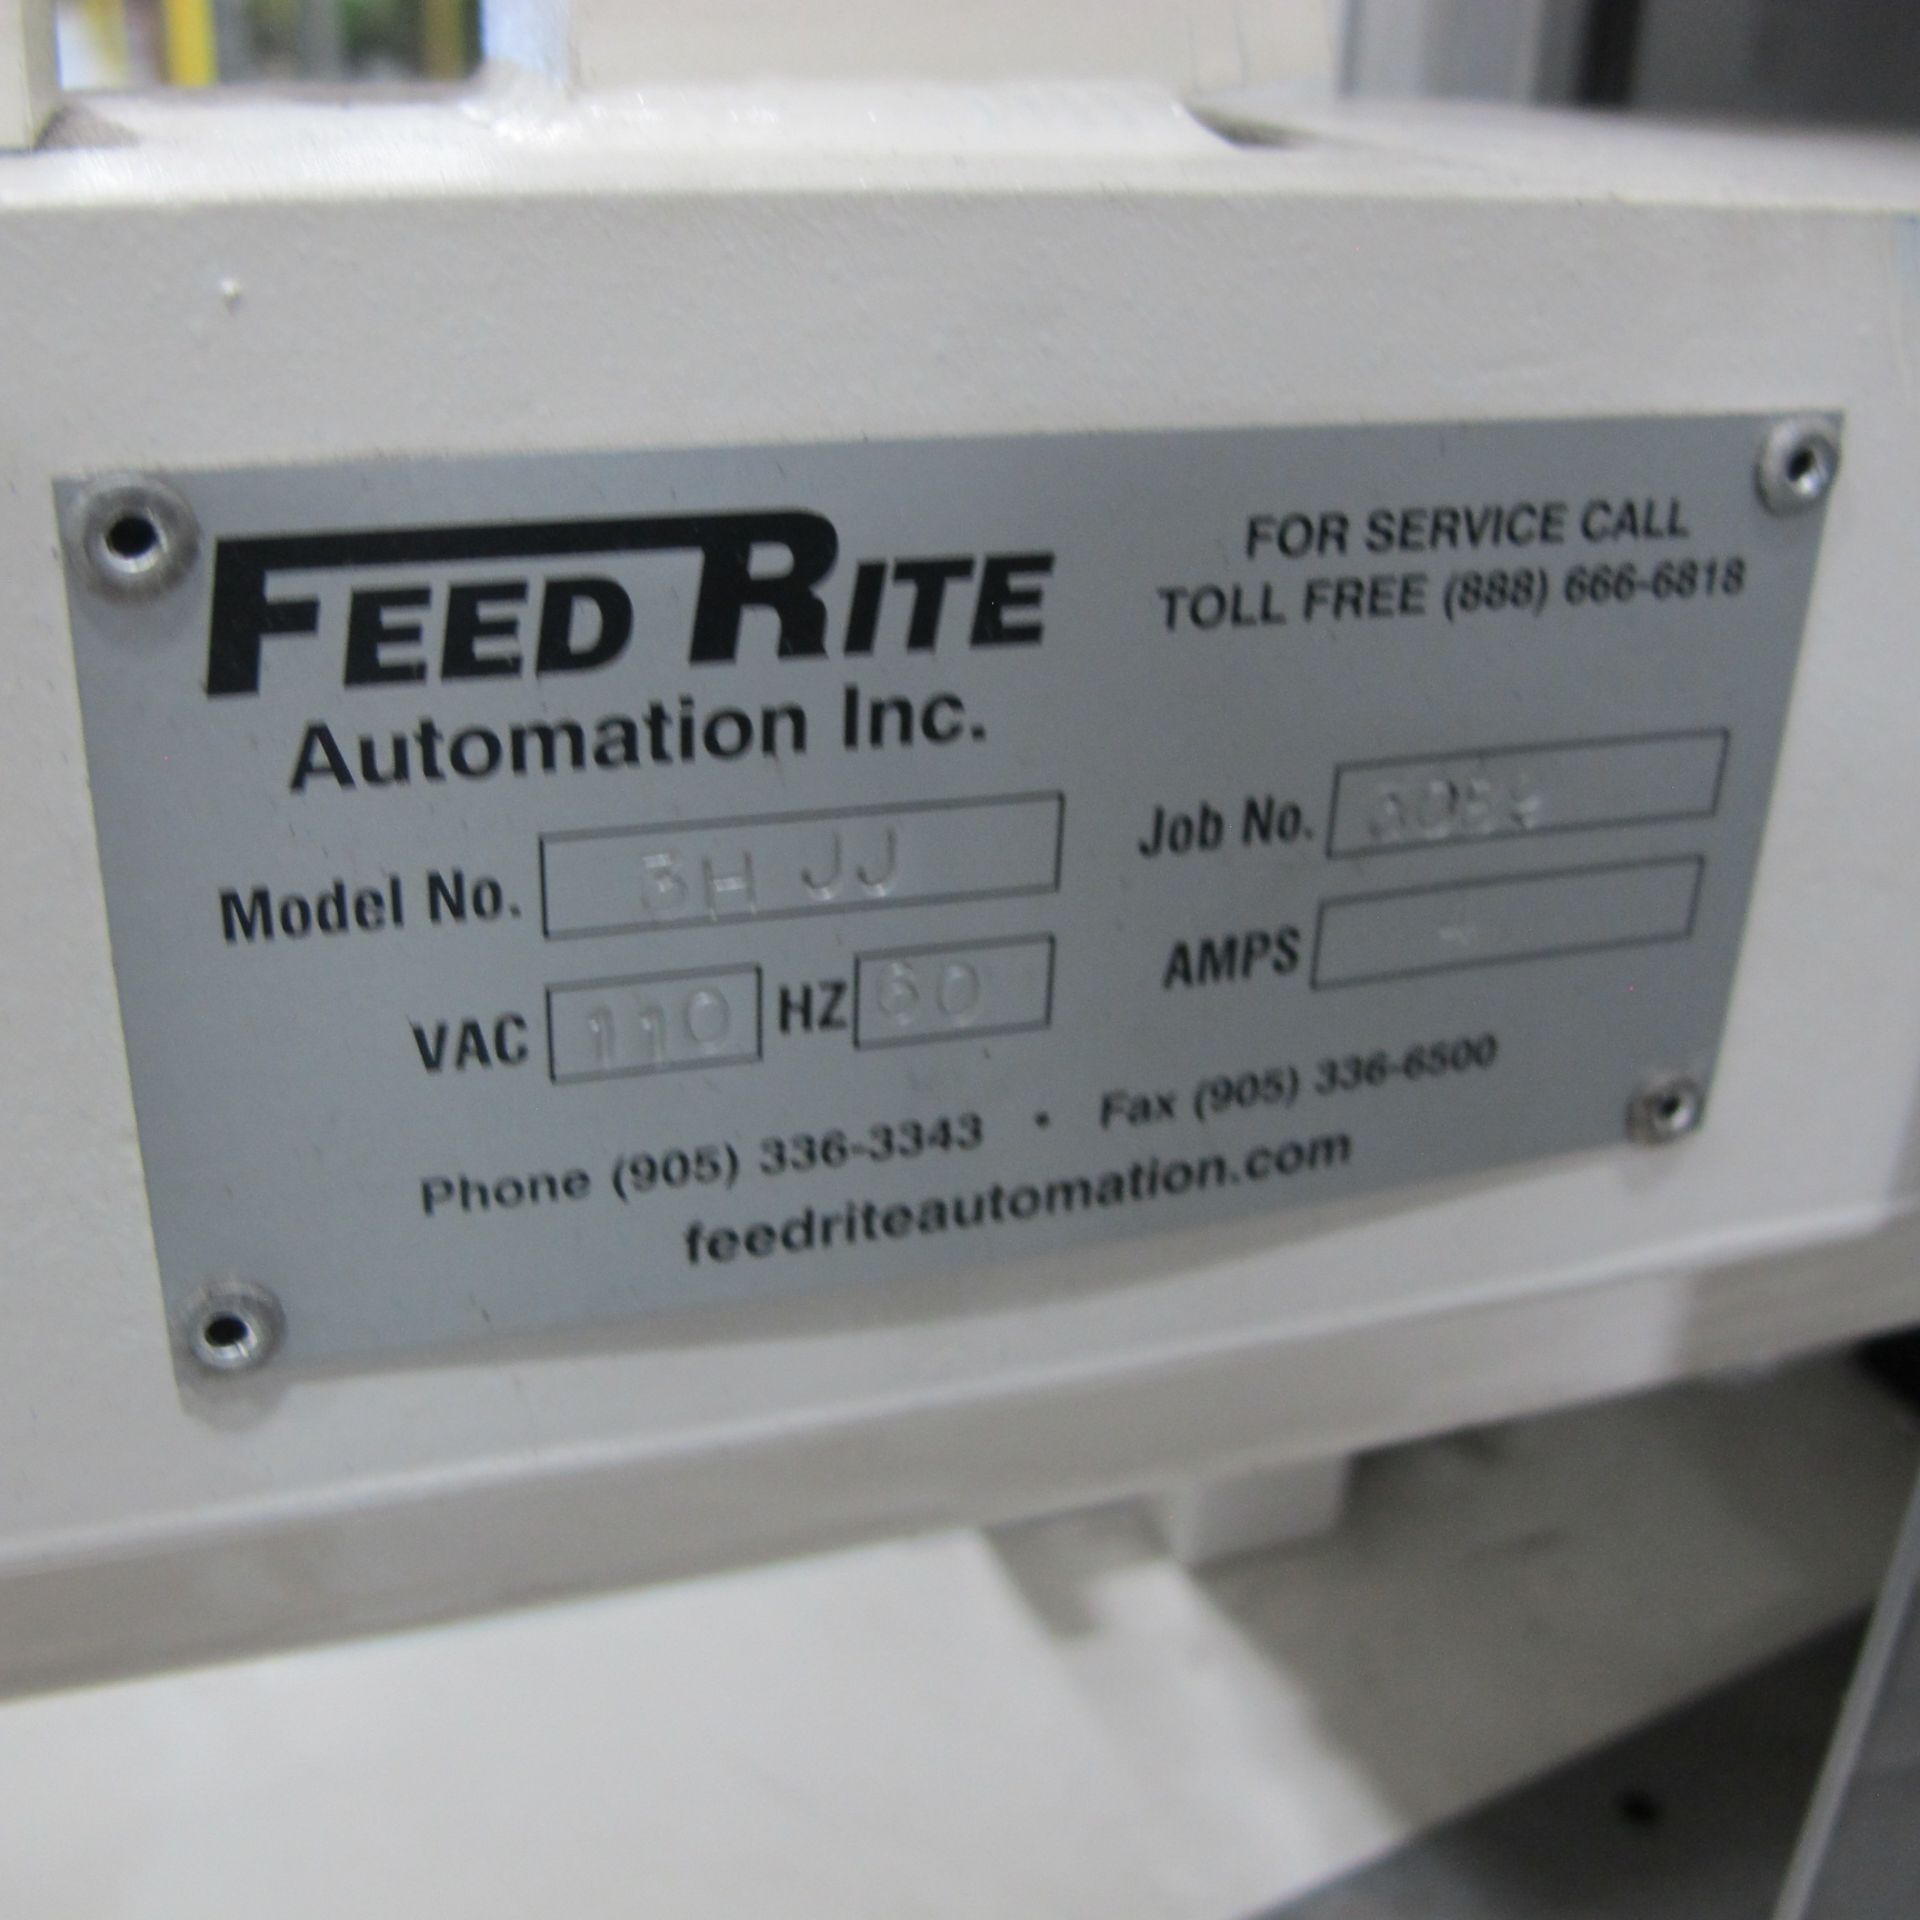 ADAPTO 318A-A PARTS FEEDER SYSTEM INCL FEED RIT AUTOMATION HOPPER, BOWL, INLINE AND CONVEYOR - Image 5 of 9